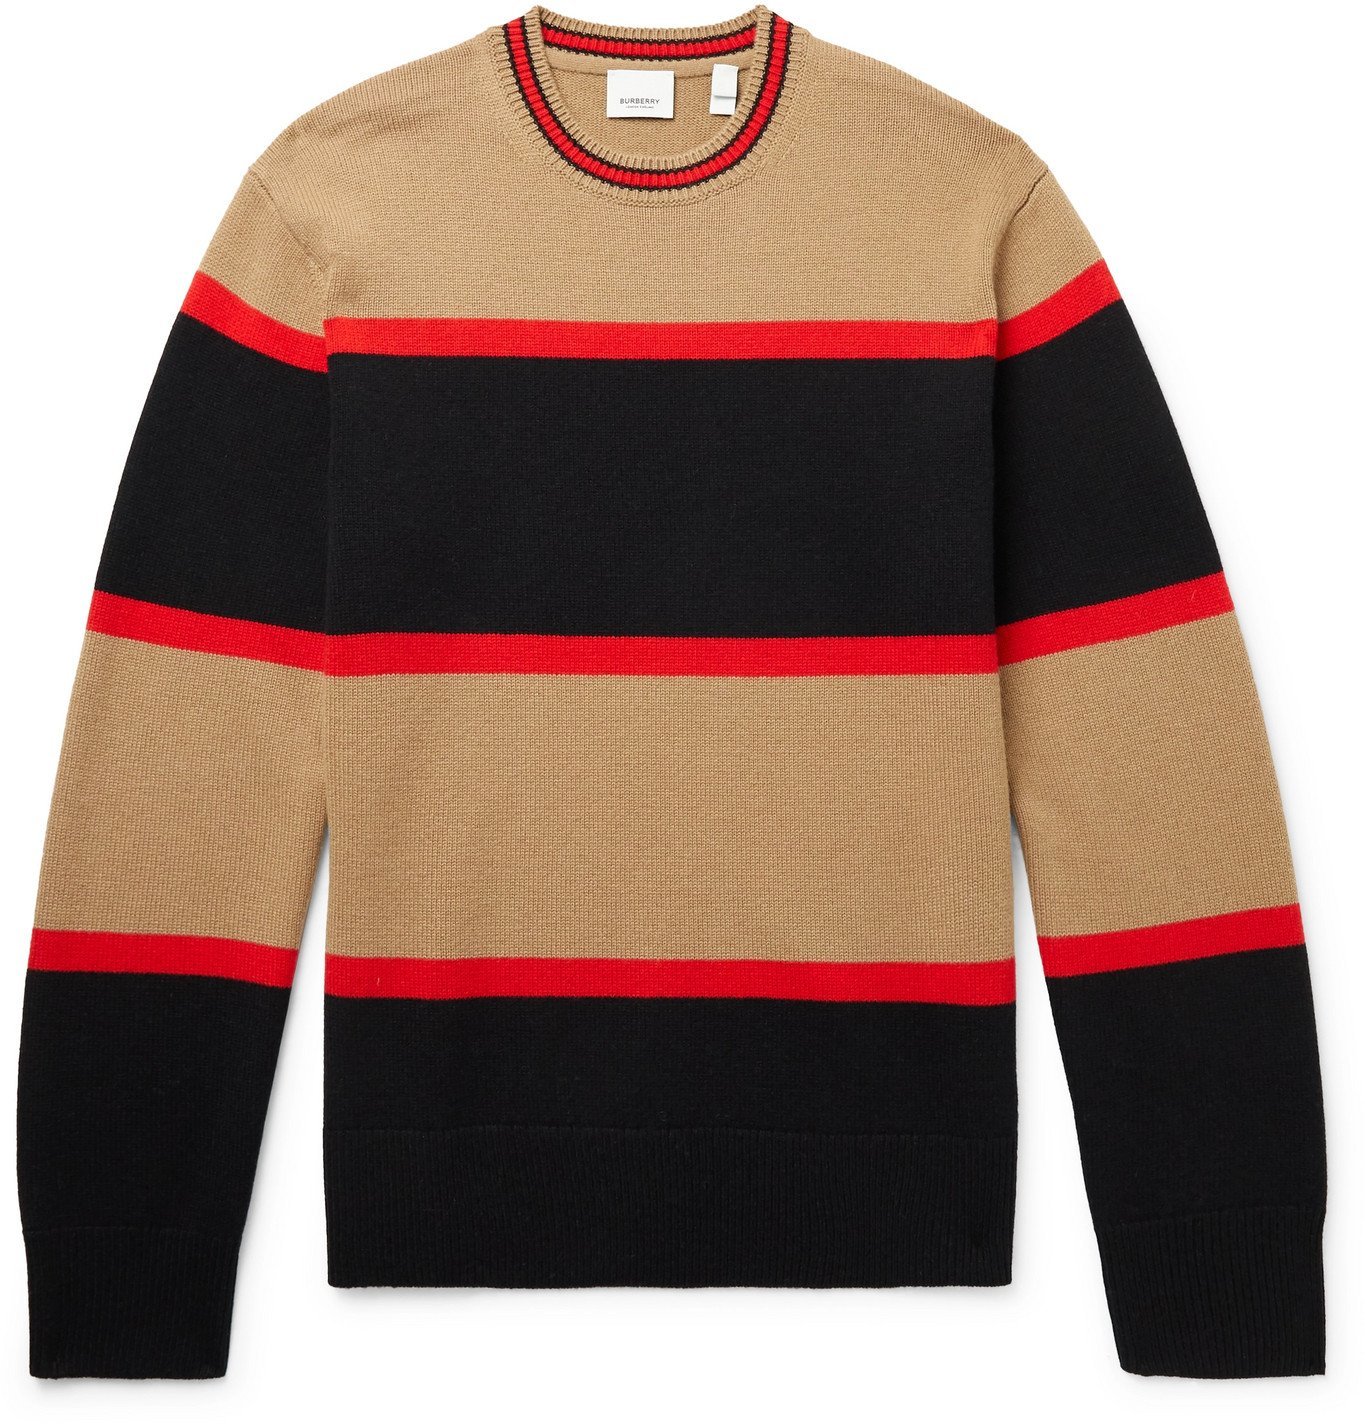 BURBERRY - Striped Wool and Cashmere-Blend Sweater - Neutrals Burberry